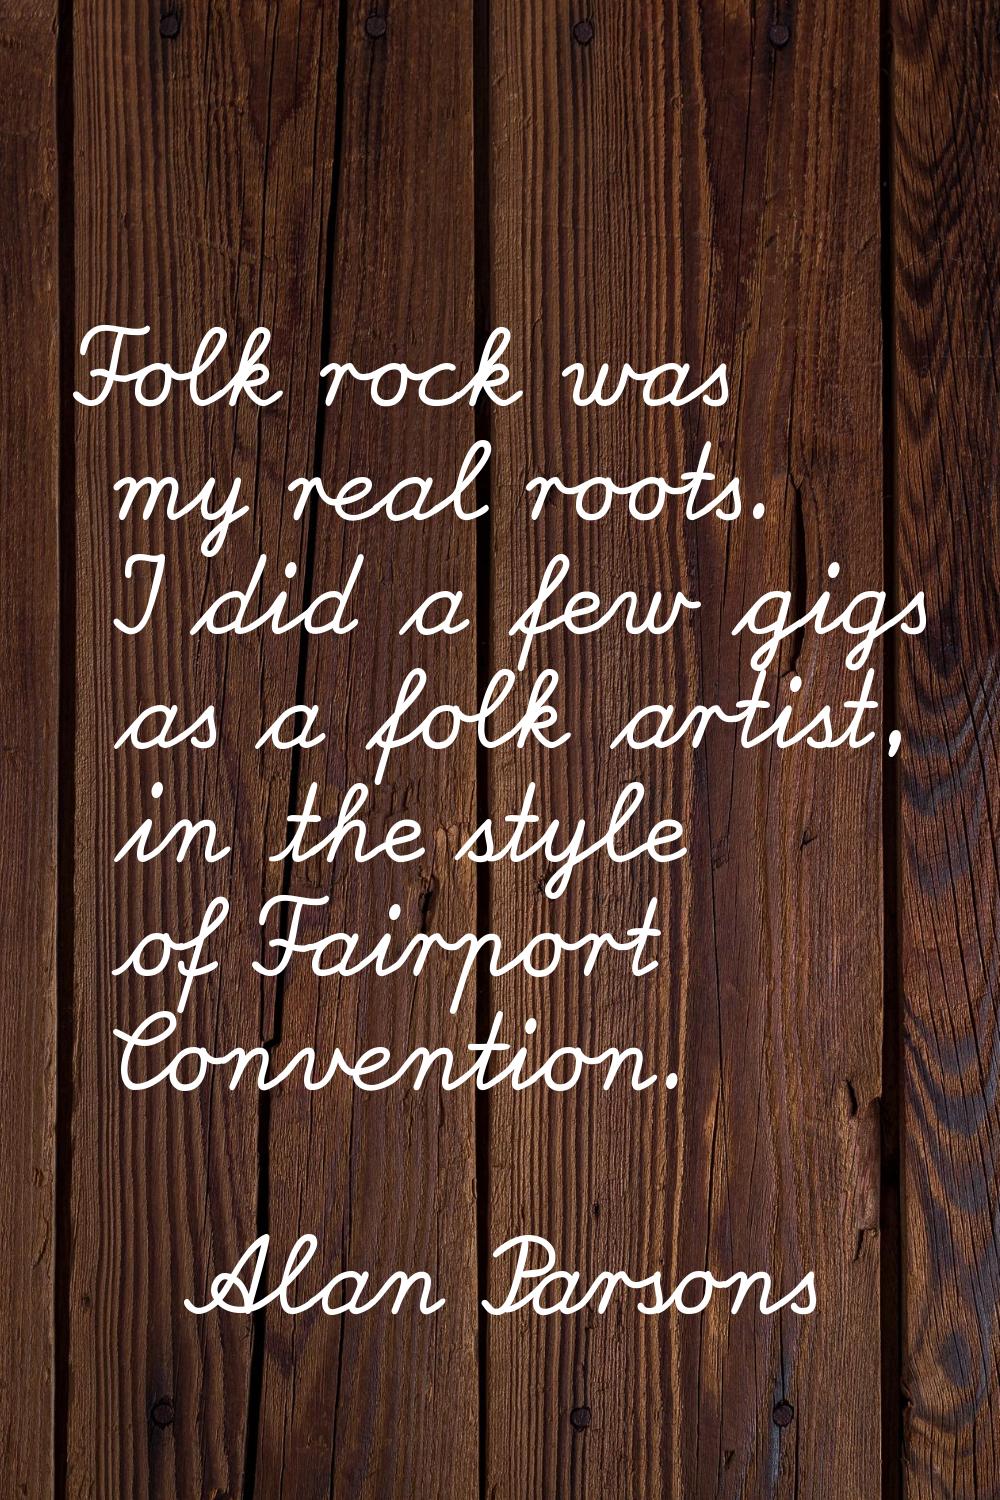 Folk rock was my real roots. I did a few gigs as a folk artist, in the style of Fairport Convention